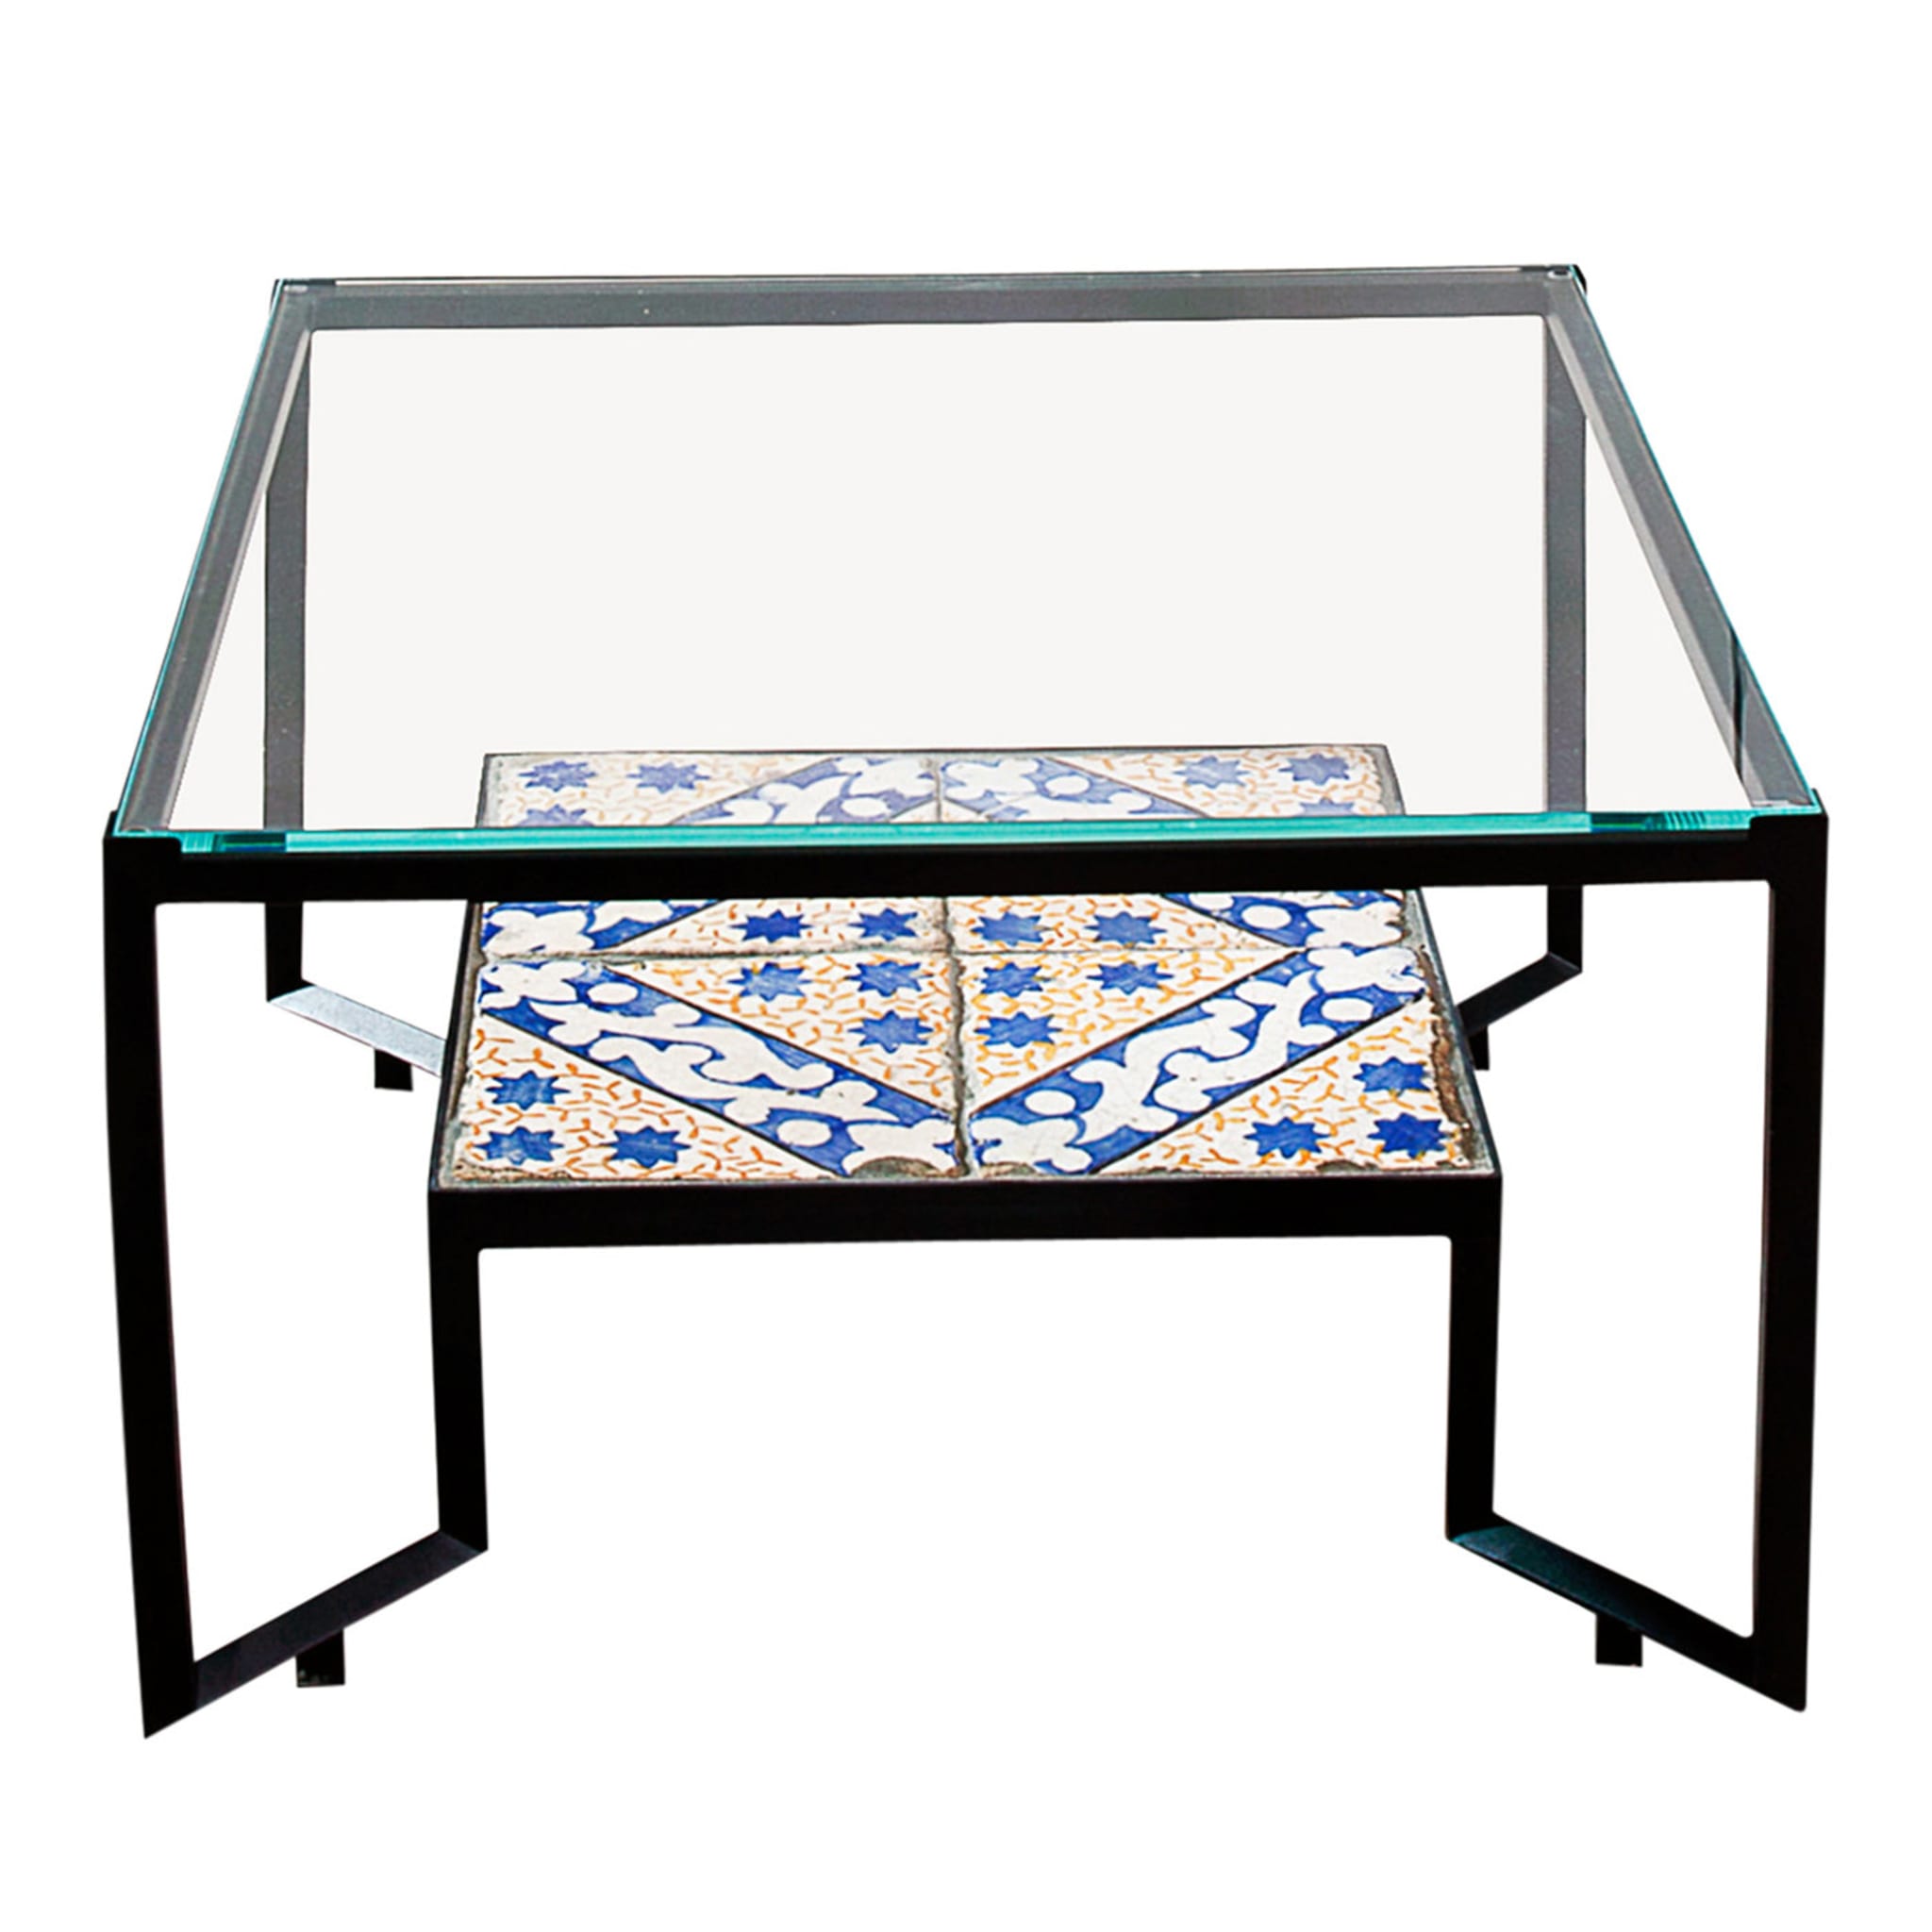 Glass and Tiles Spider Table - Main view